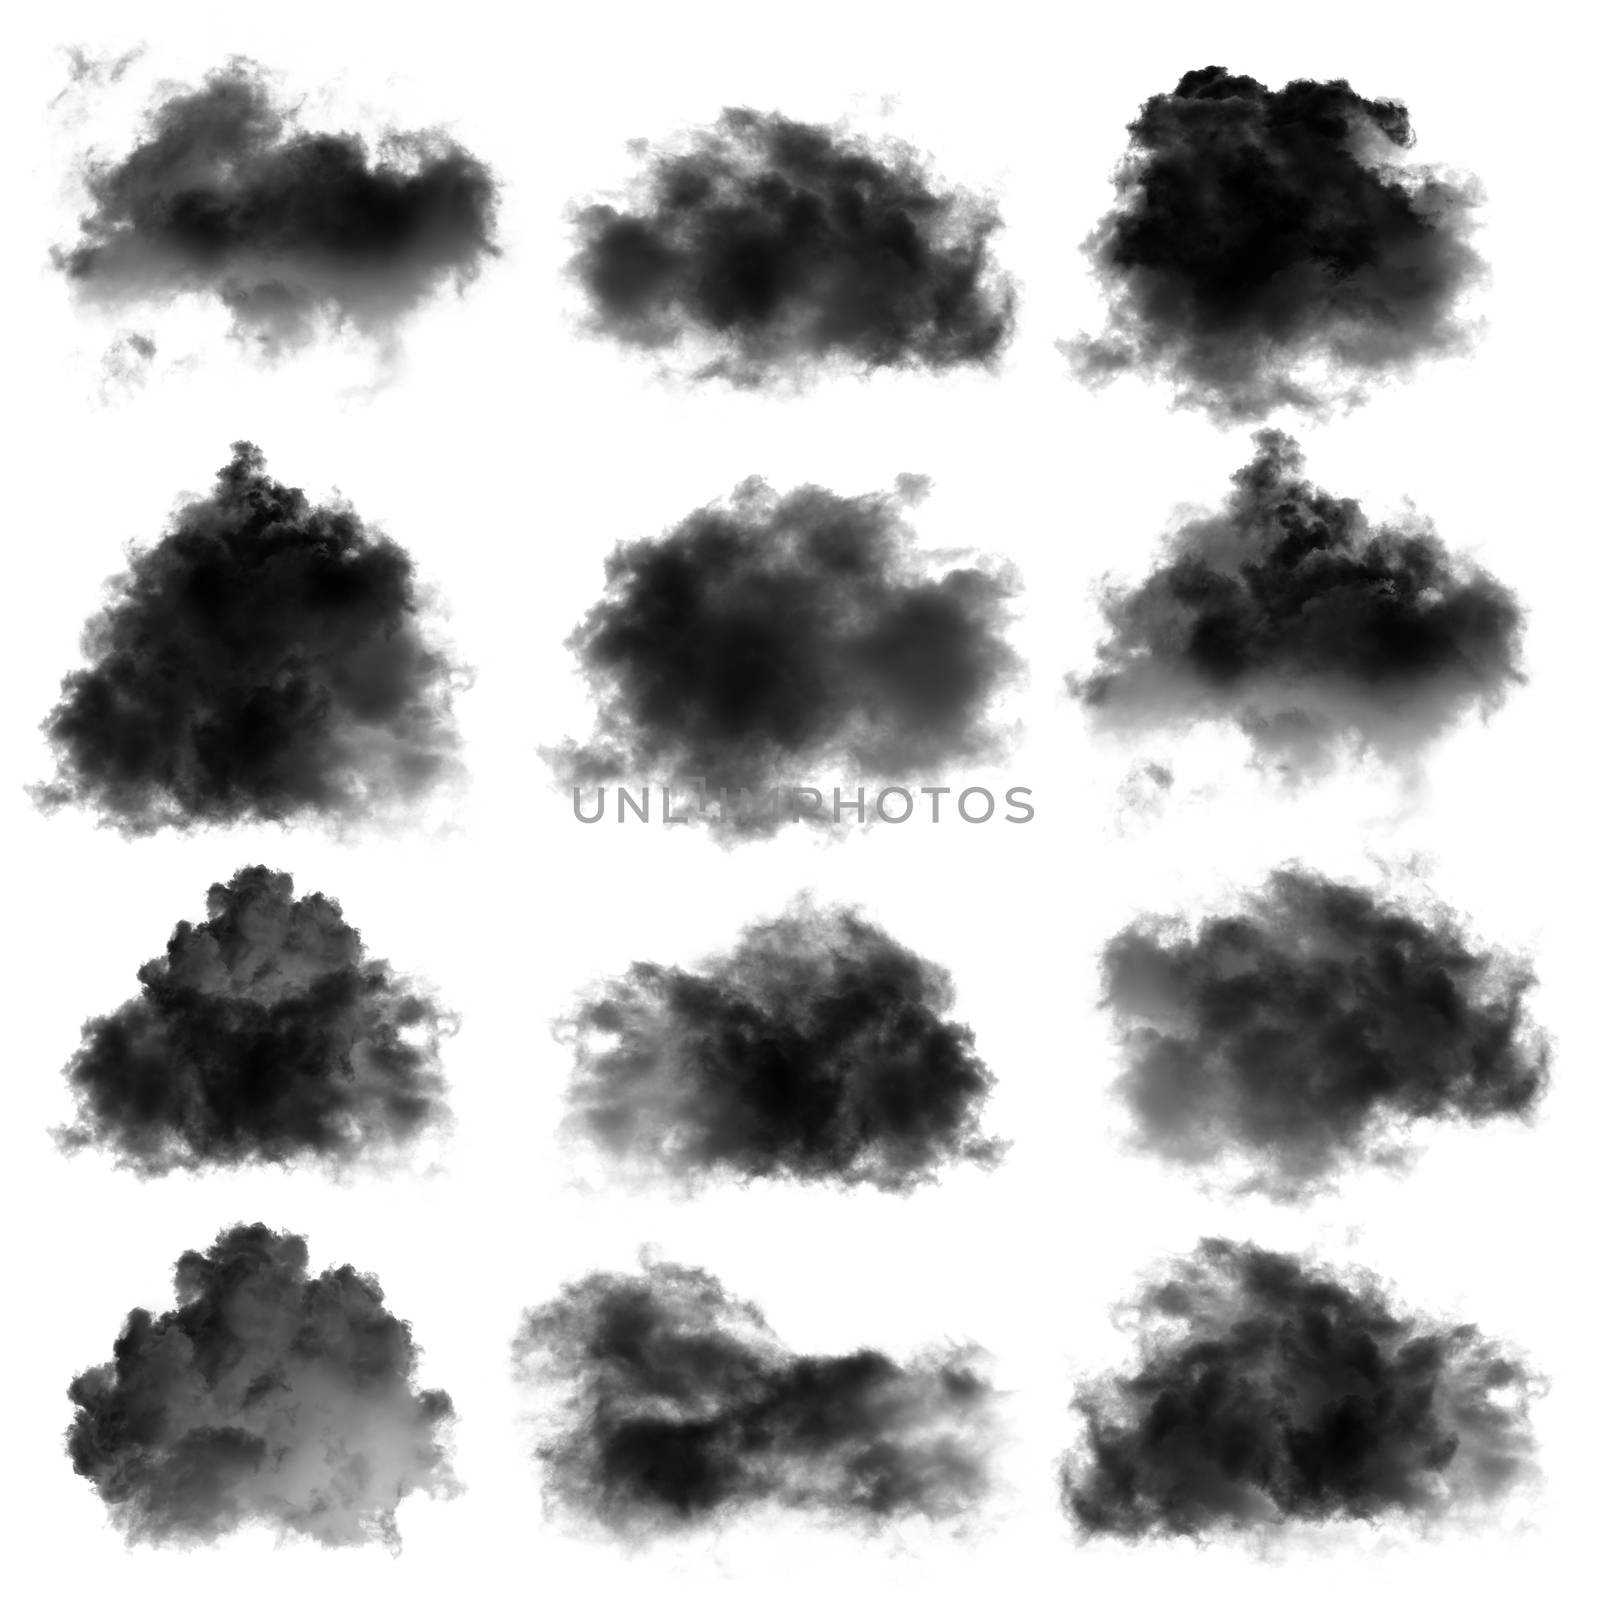 Black clouds or smoke on a white background by sommai